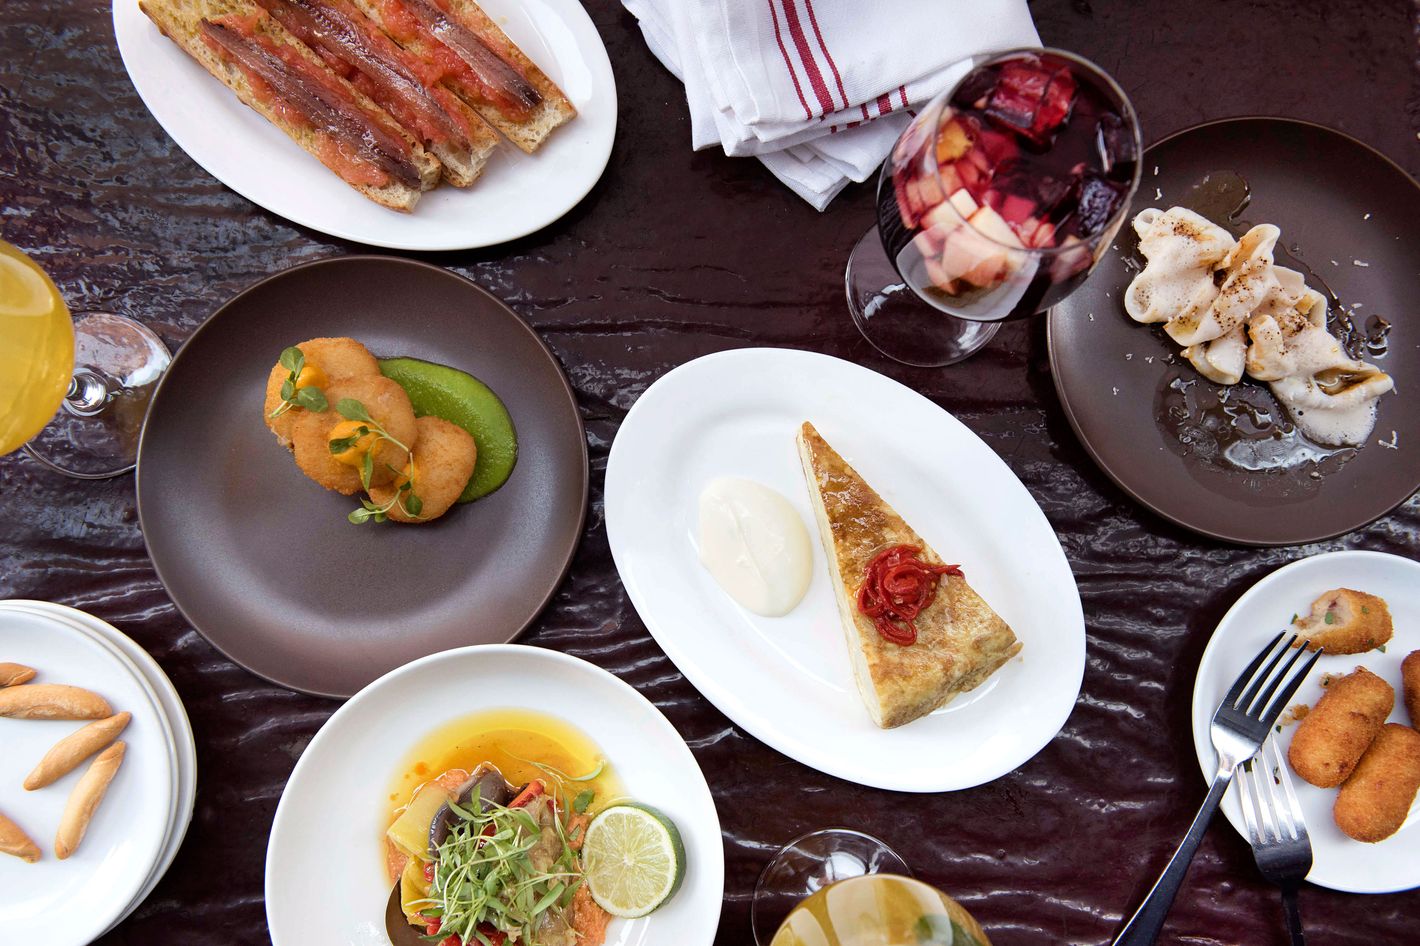 The Absolute Tapas in NYC